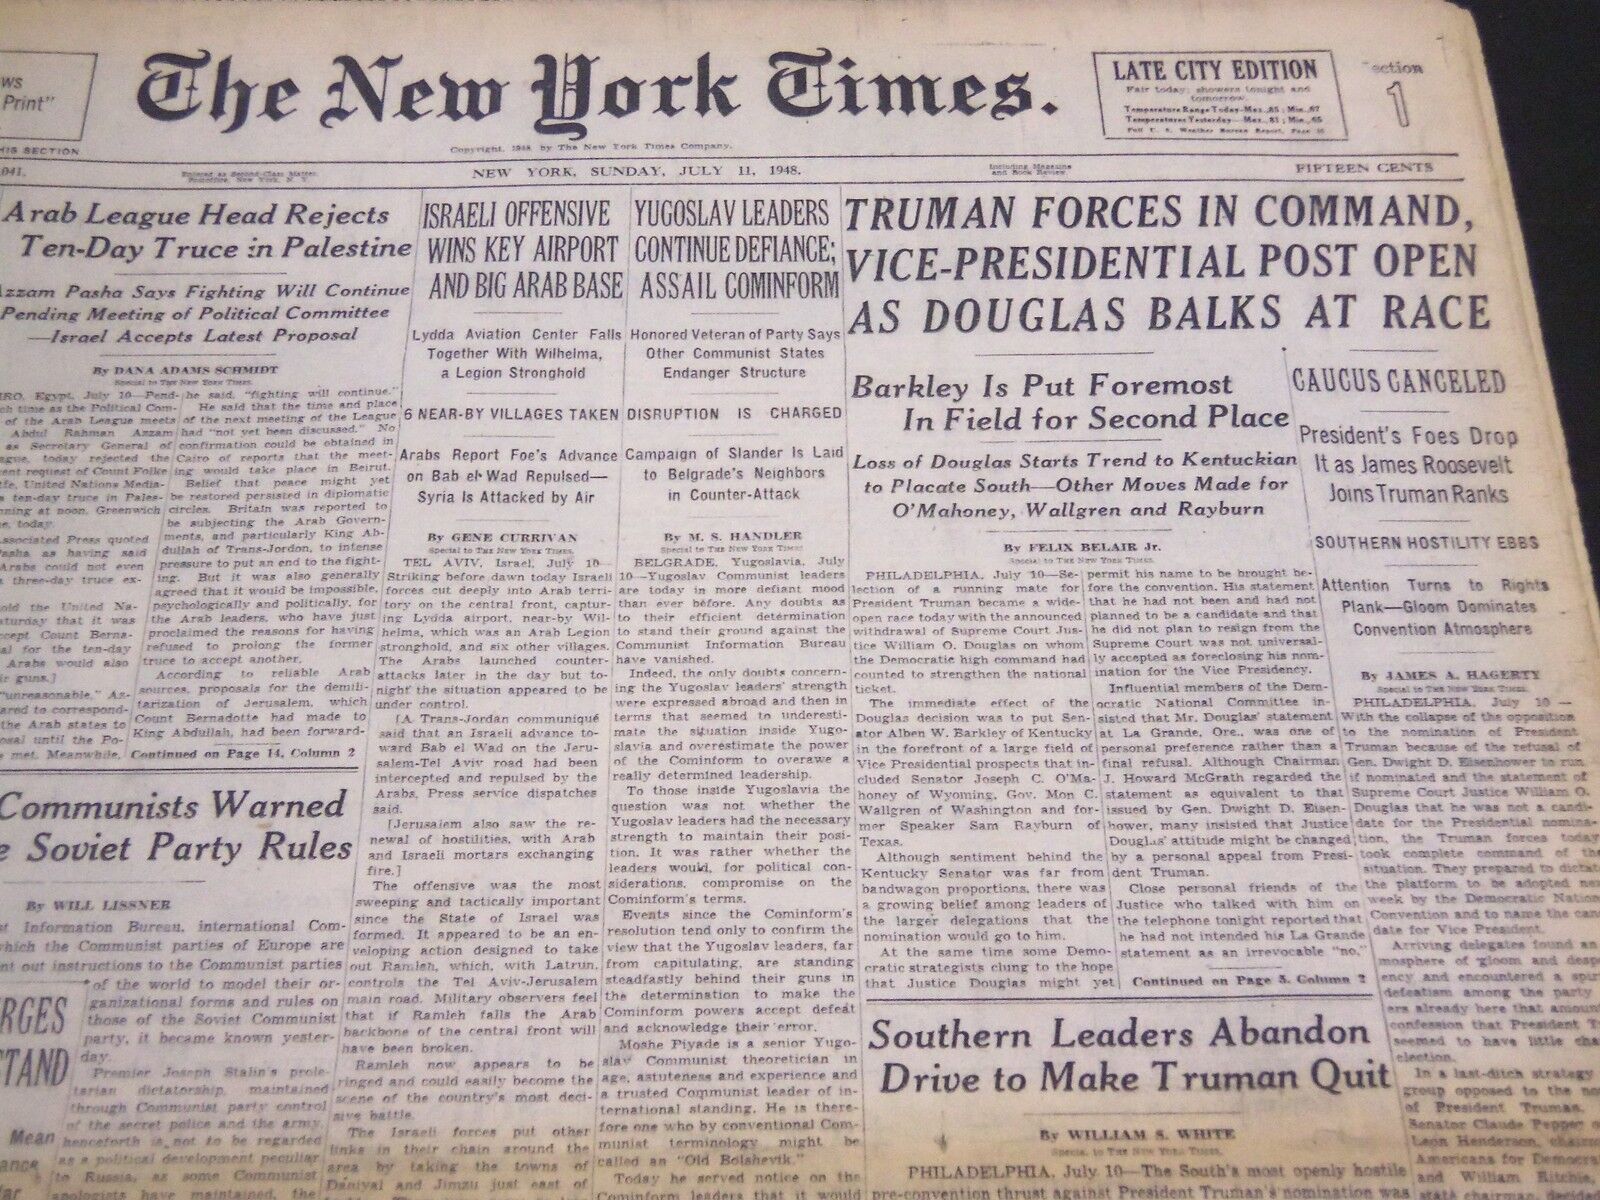 1948 JULY 11 NEW YORK TIMES - TRUMAN FORCES IN COMMAND - NT 4428